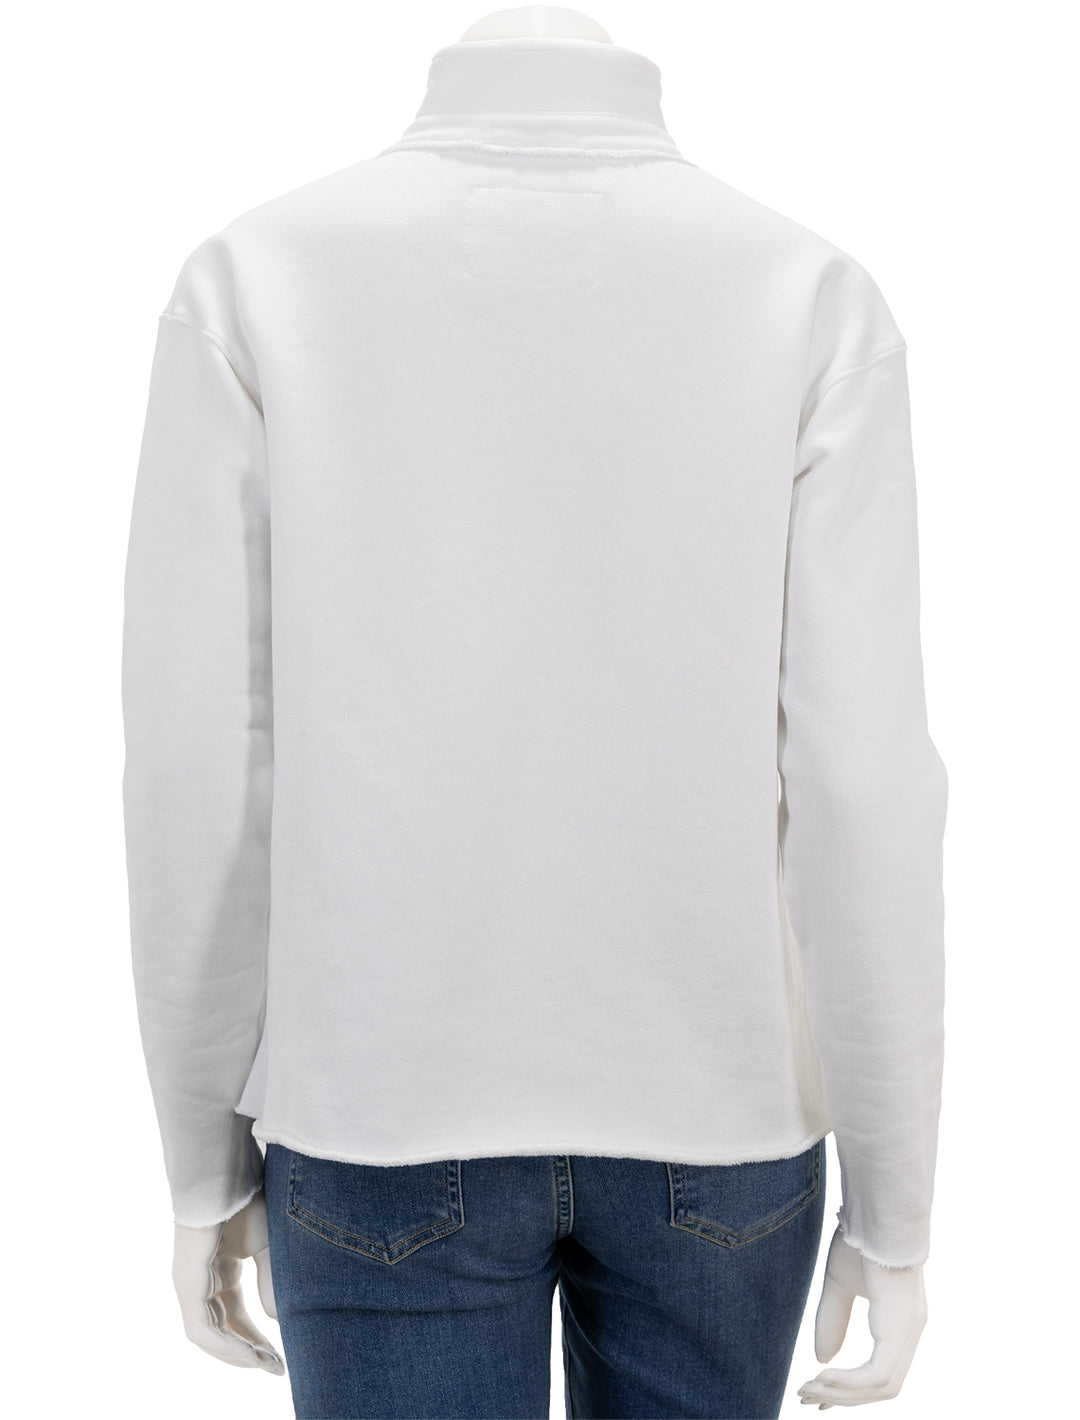 Back view of Frank & Eileen's patrick popover henley in white.